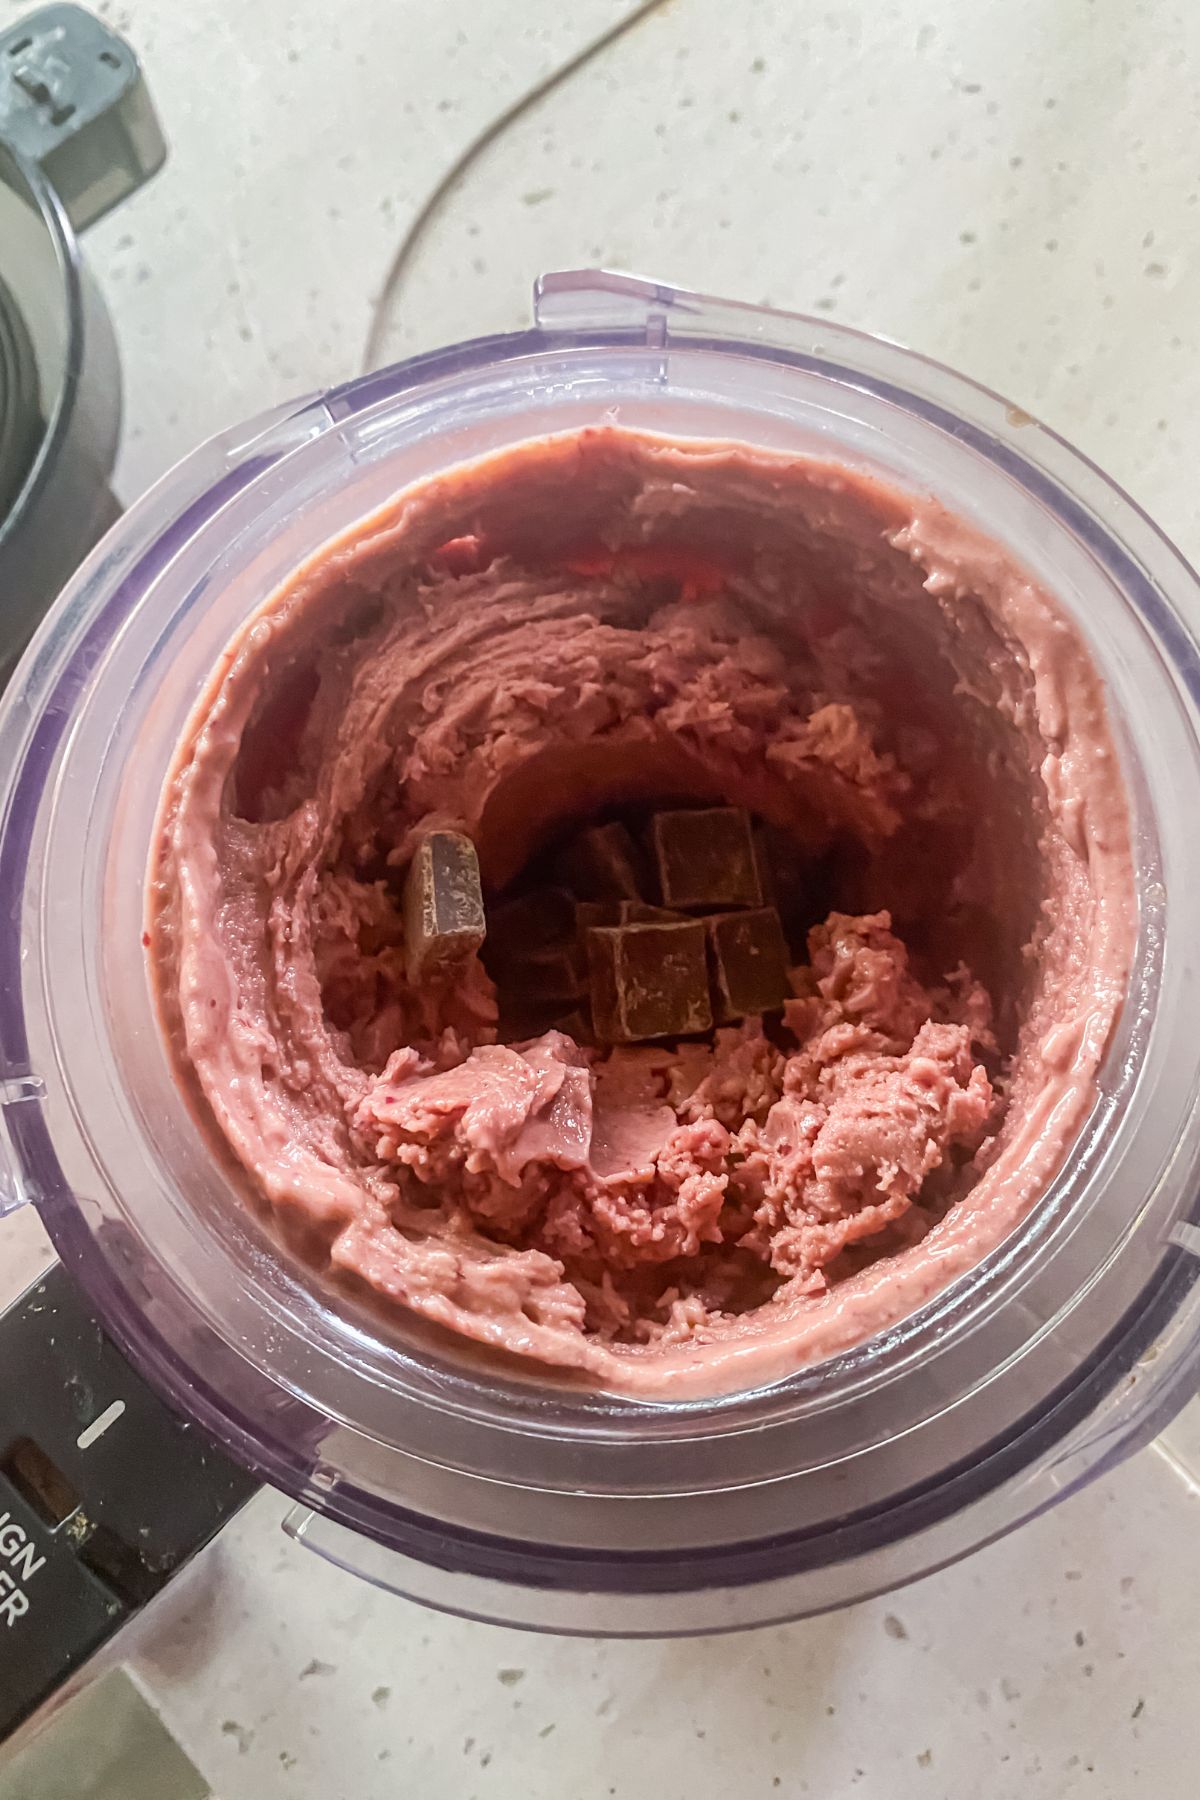 A blender filled with a mixture of chocolate and raspberry-cherry ice cream.